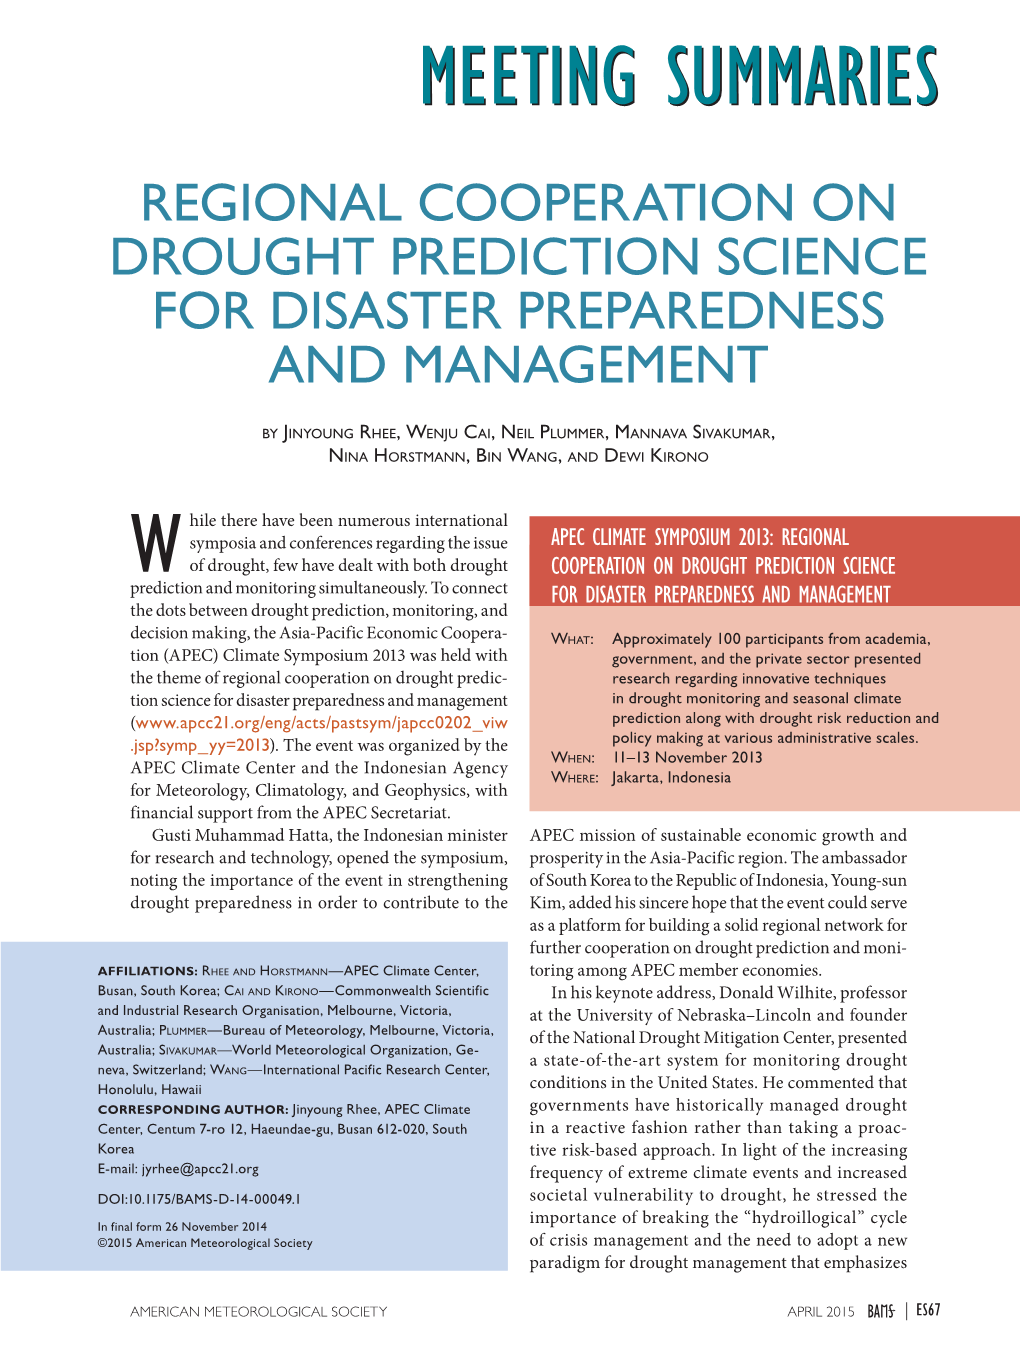 Regional Cooperation on Drought Prediction Science for Disaster Preparedness and Management